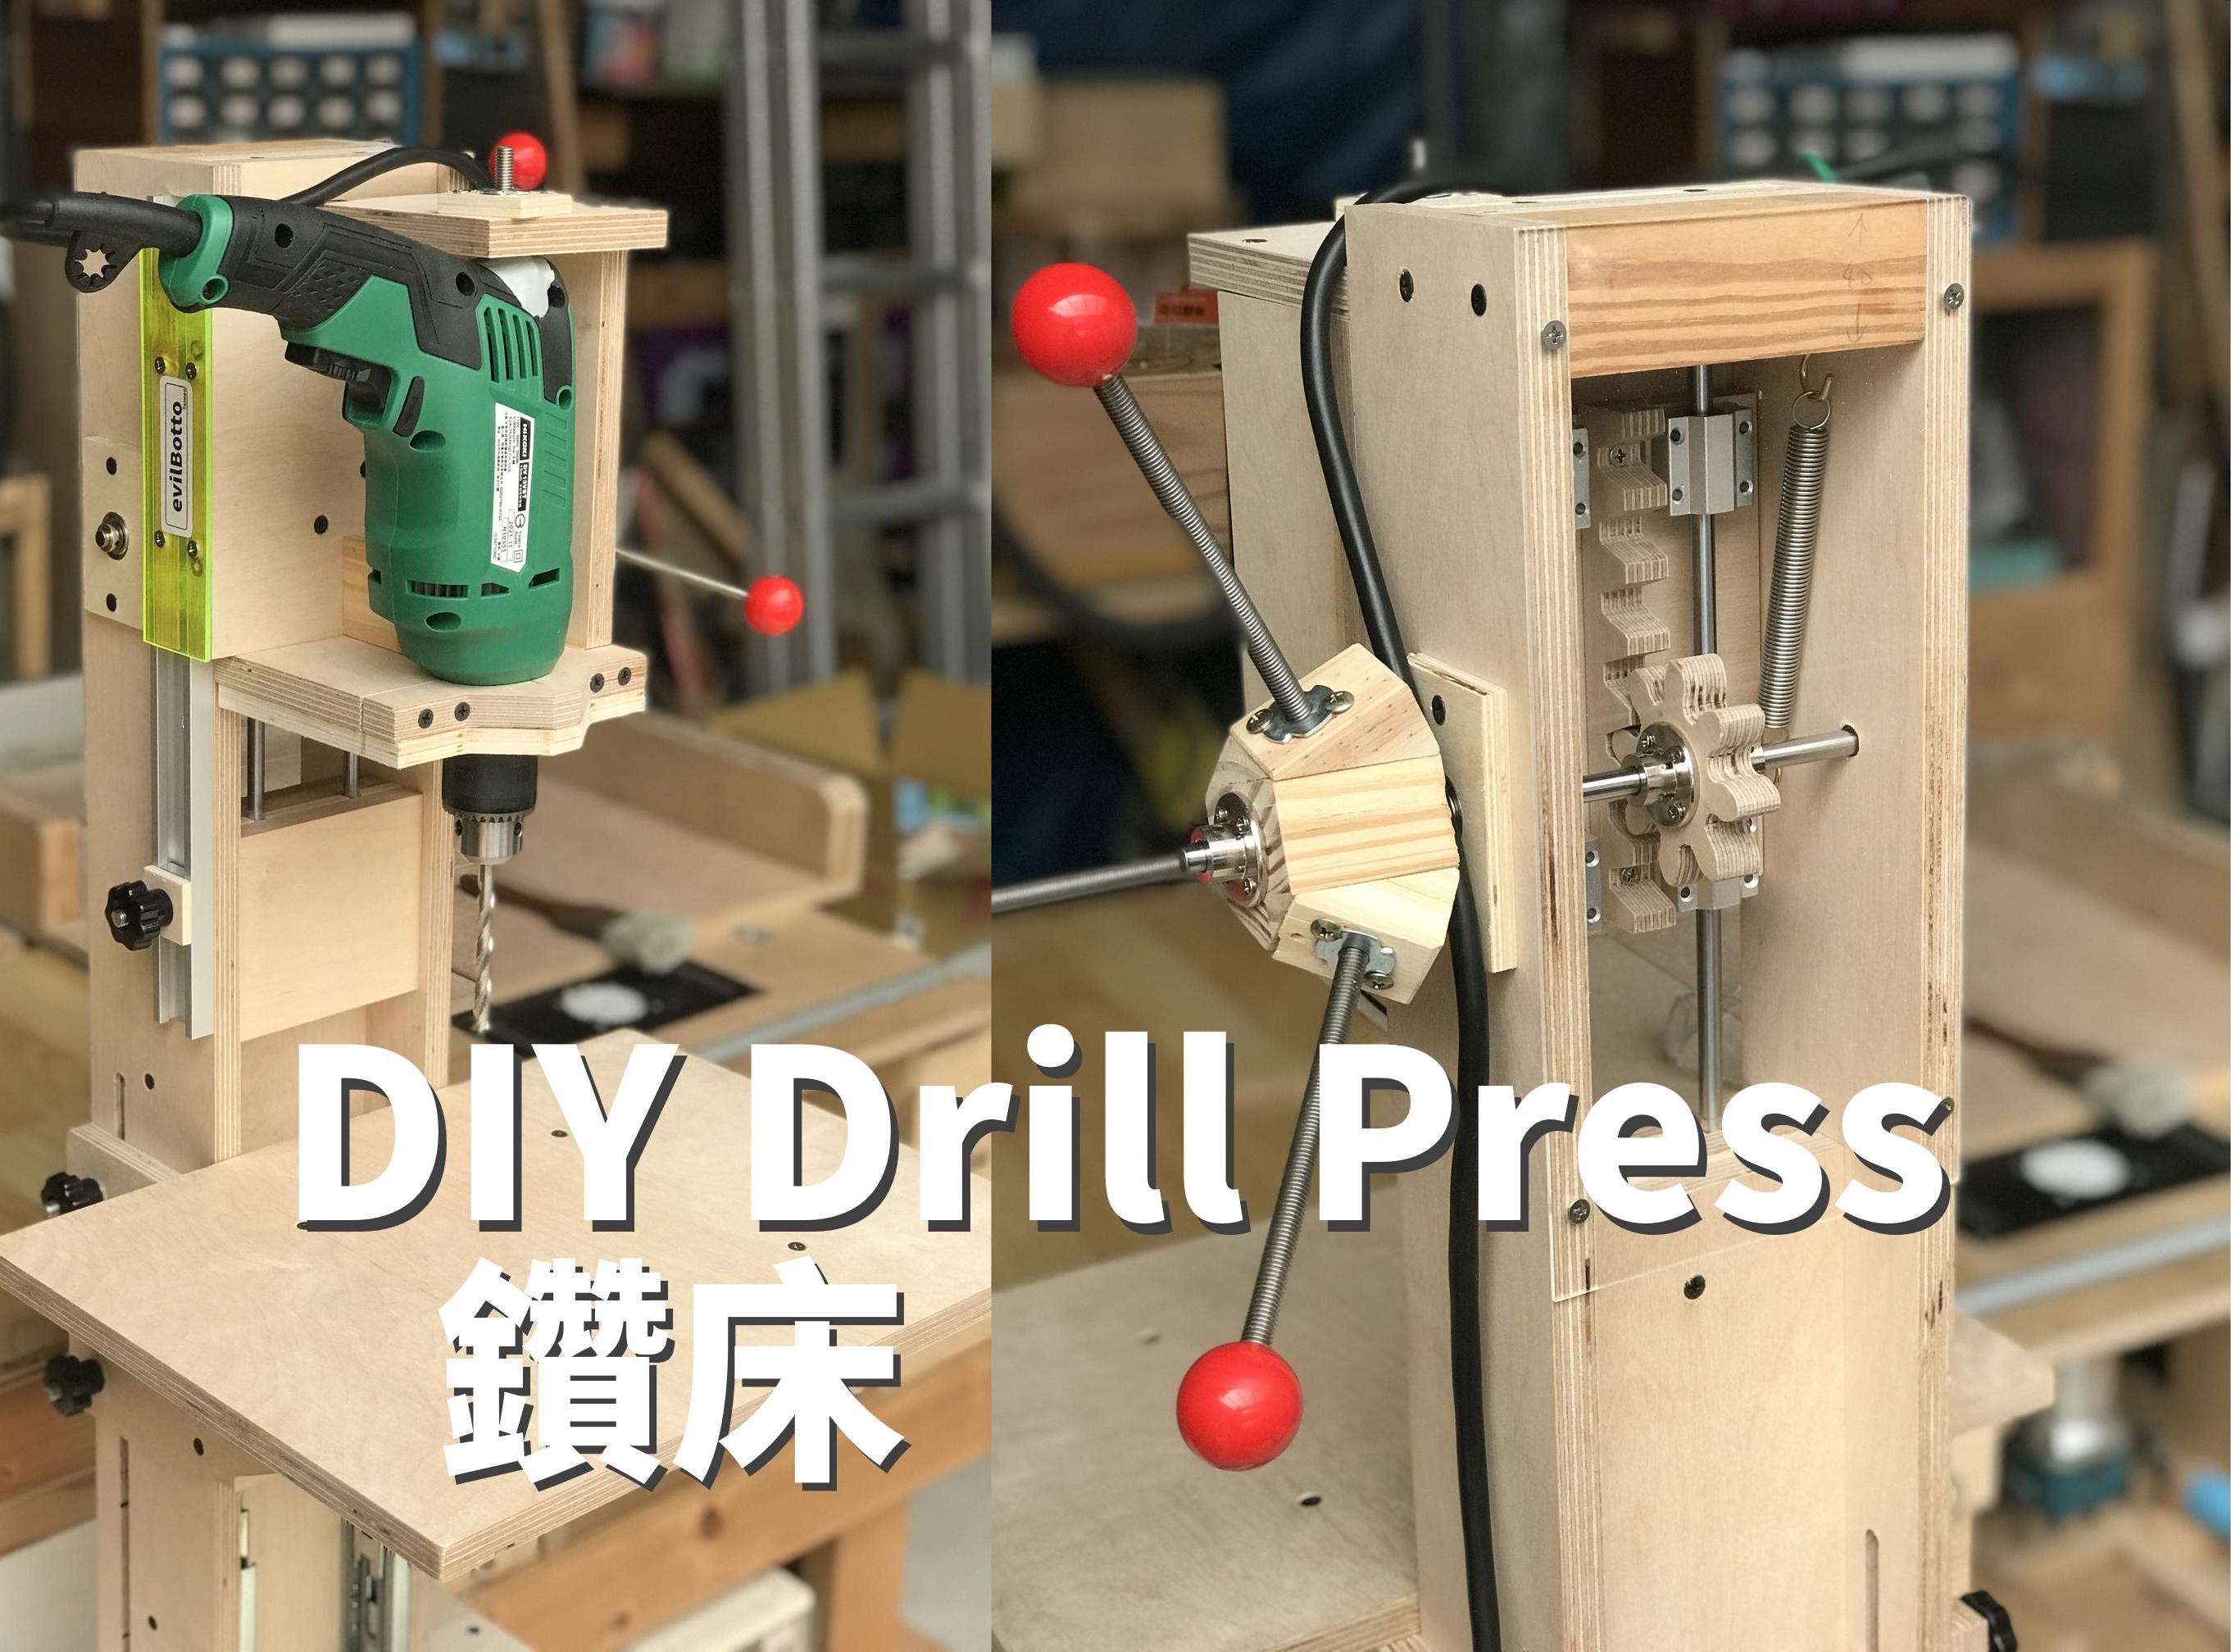 DIY Drill Press Machine. I've Been Dying to Have a Drill Press and Finally Made It!